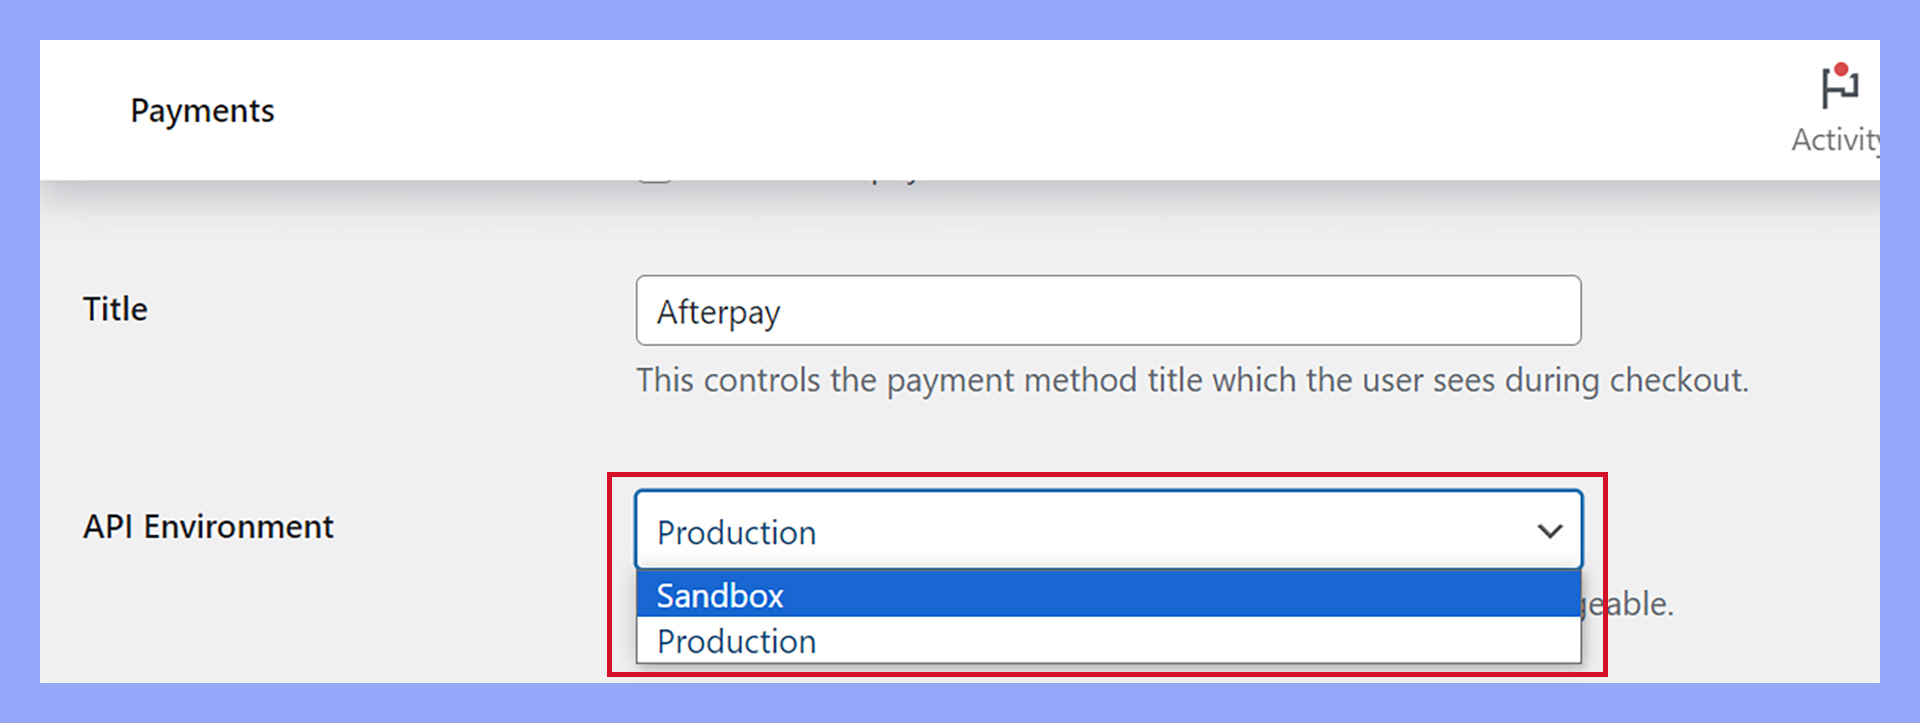 Enabling sandbox mode to test Afterpay in WooCommerce.